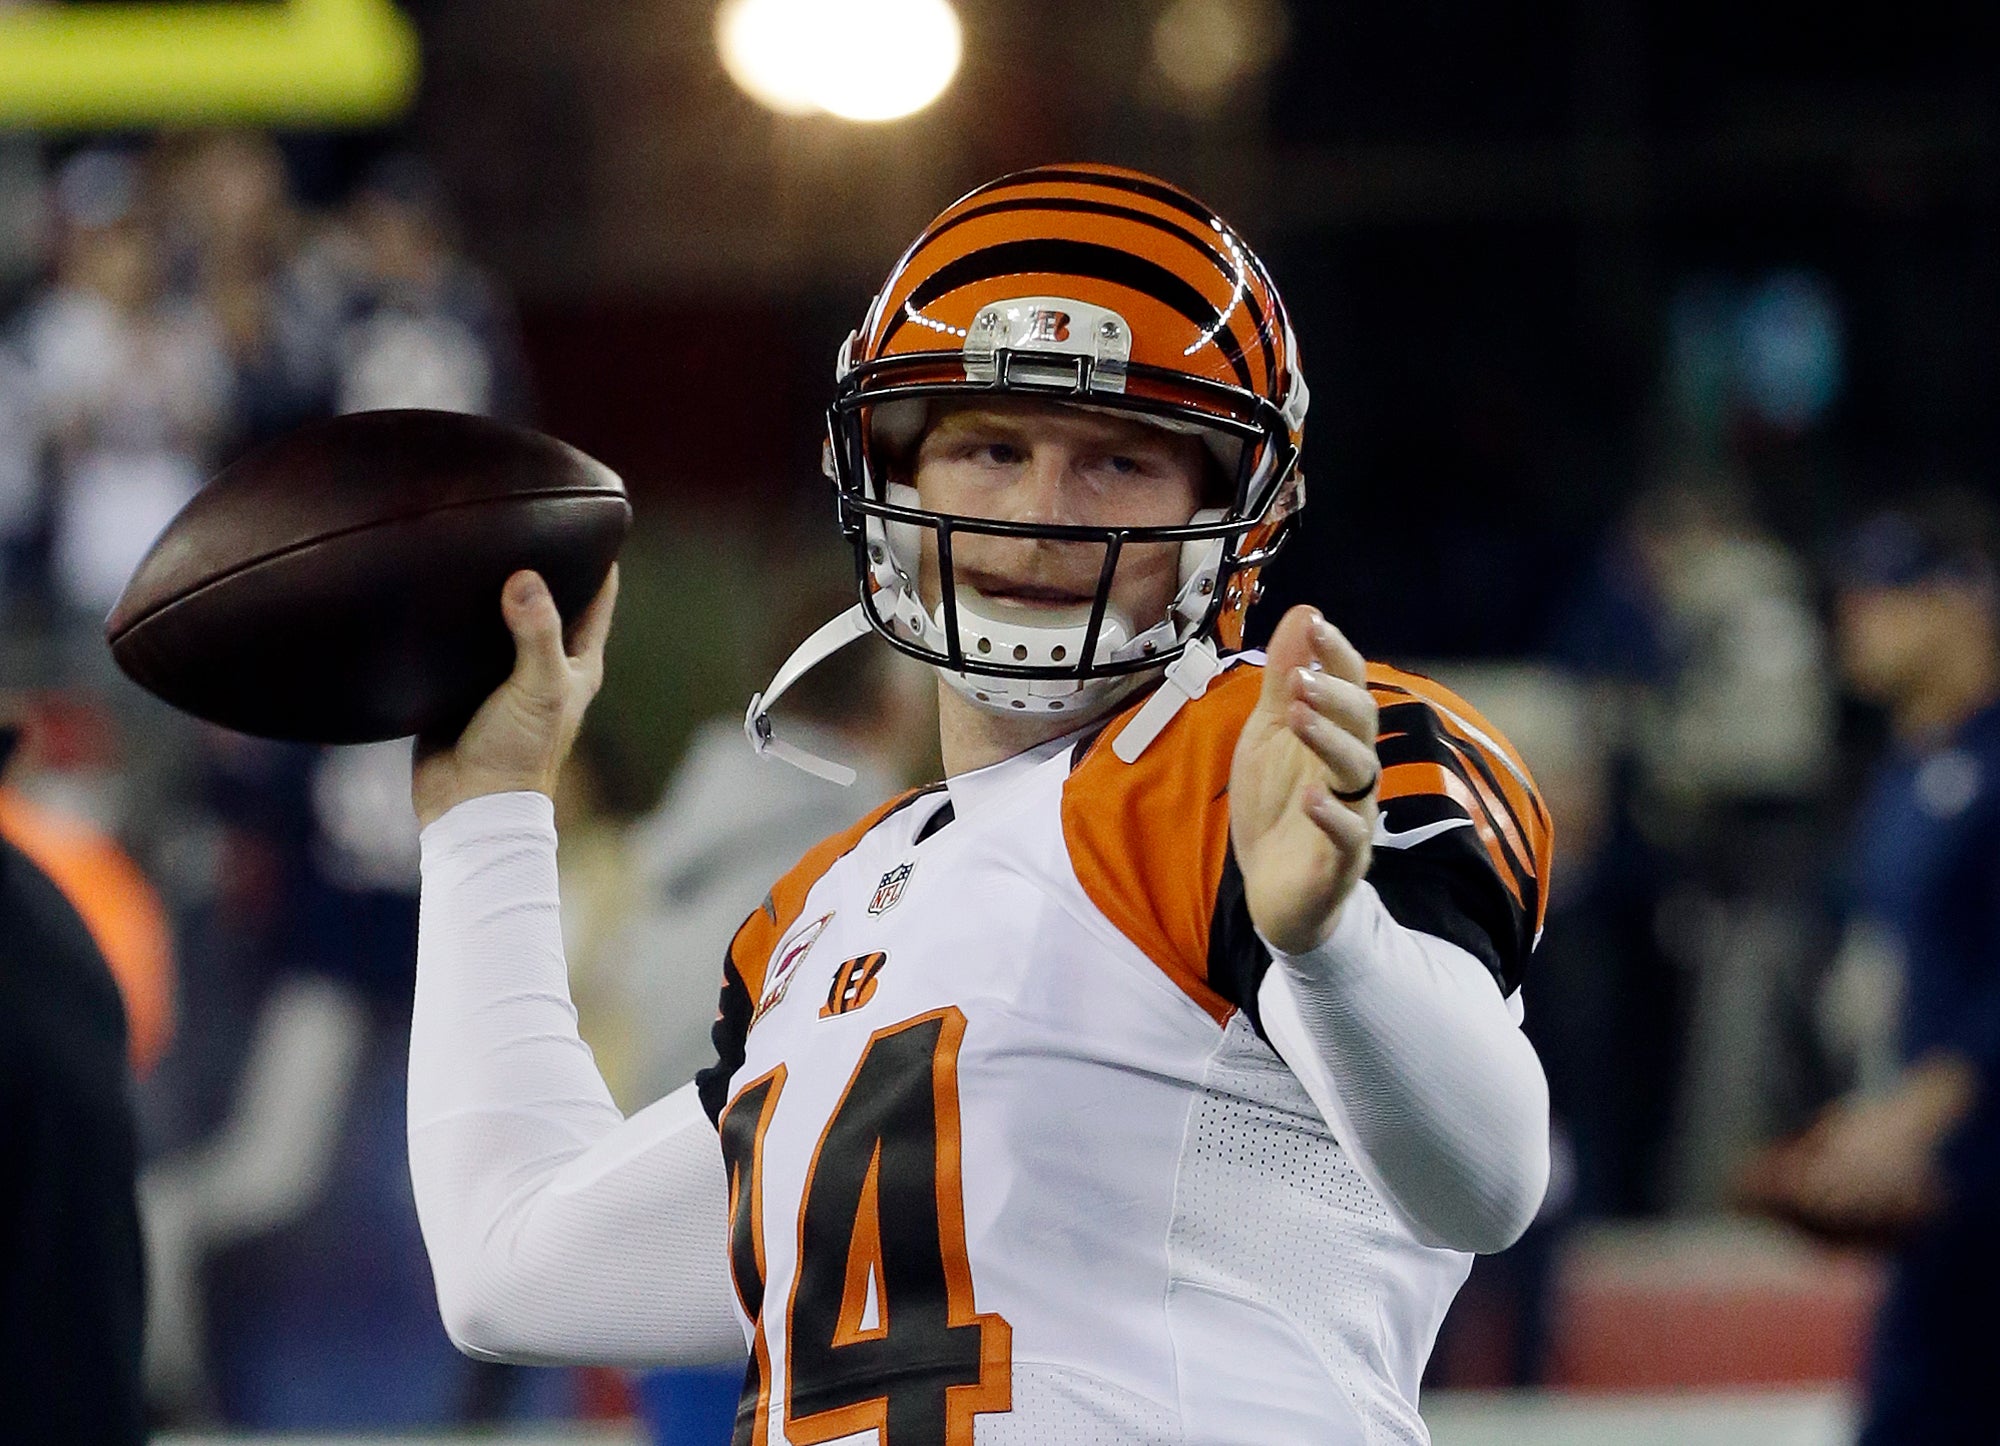 4 things to consider about Andy Dalton potentially signing with the Patriots